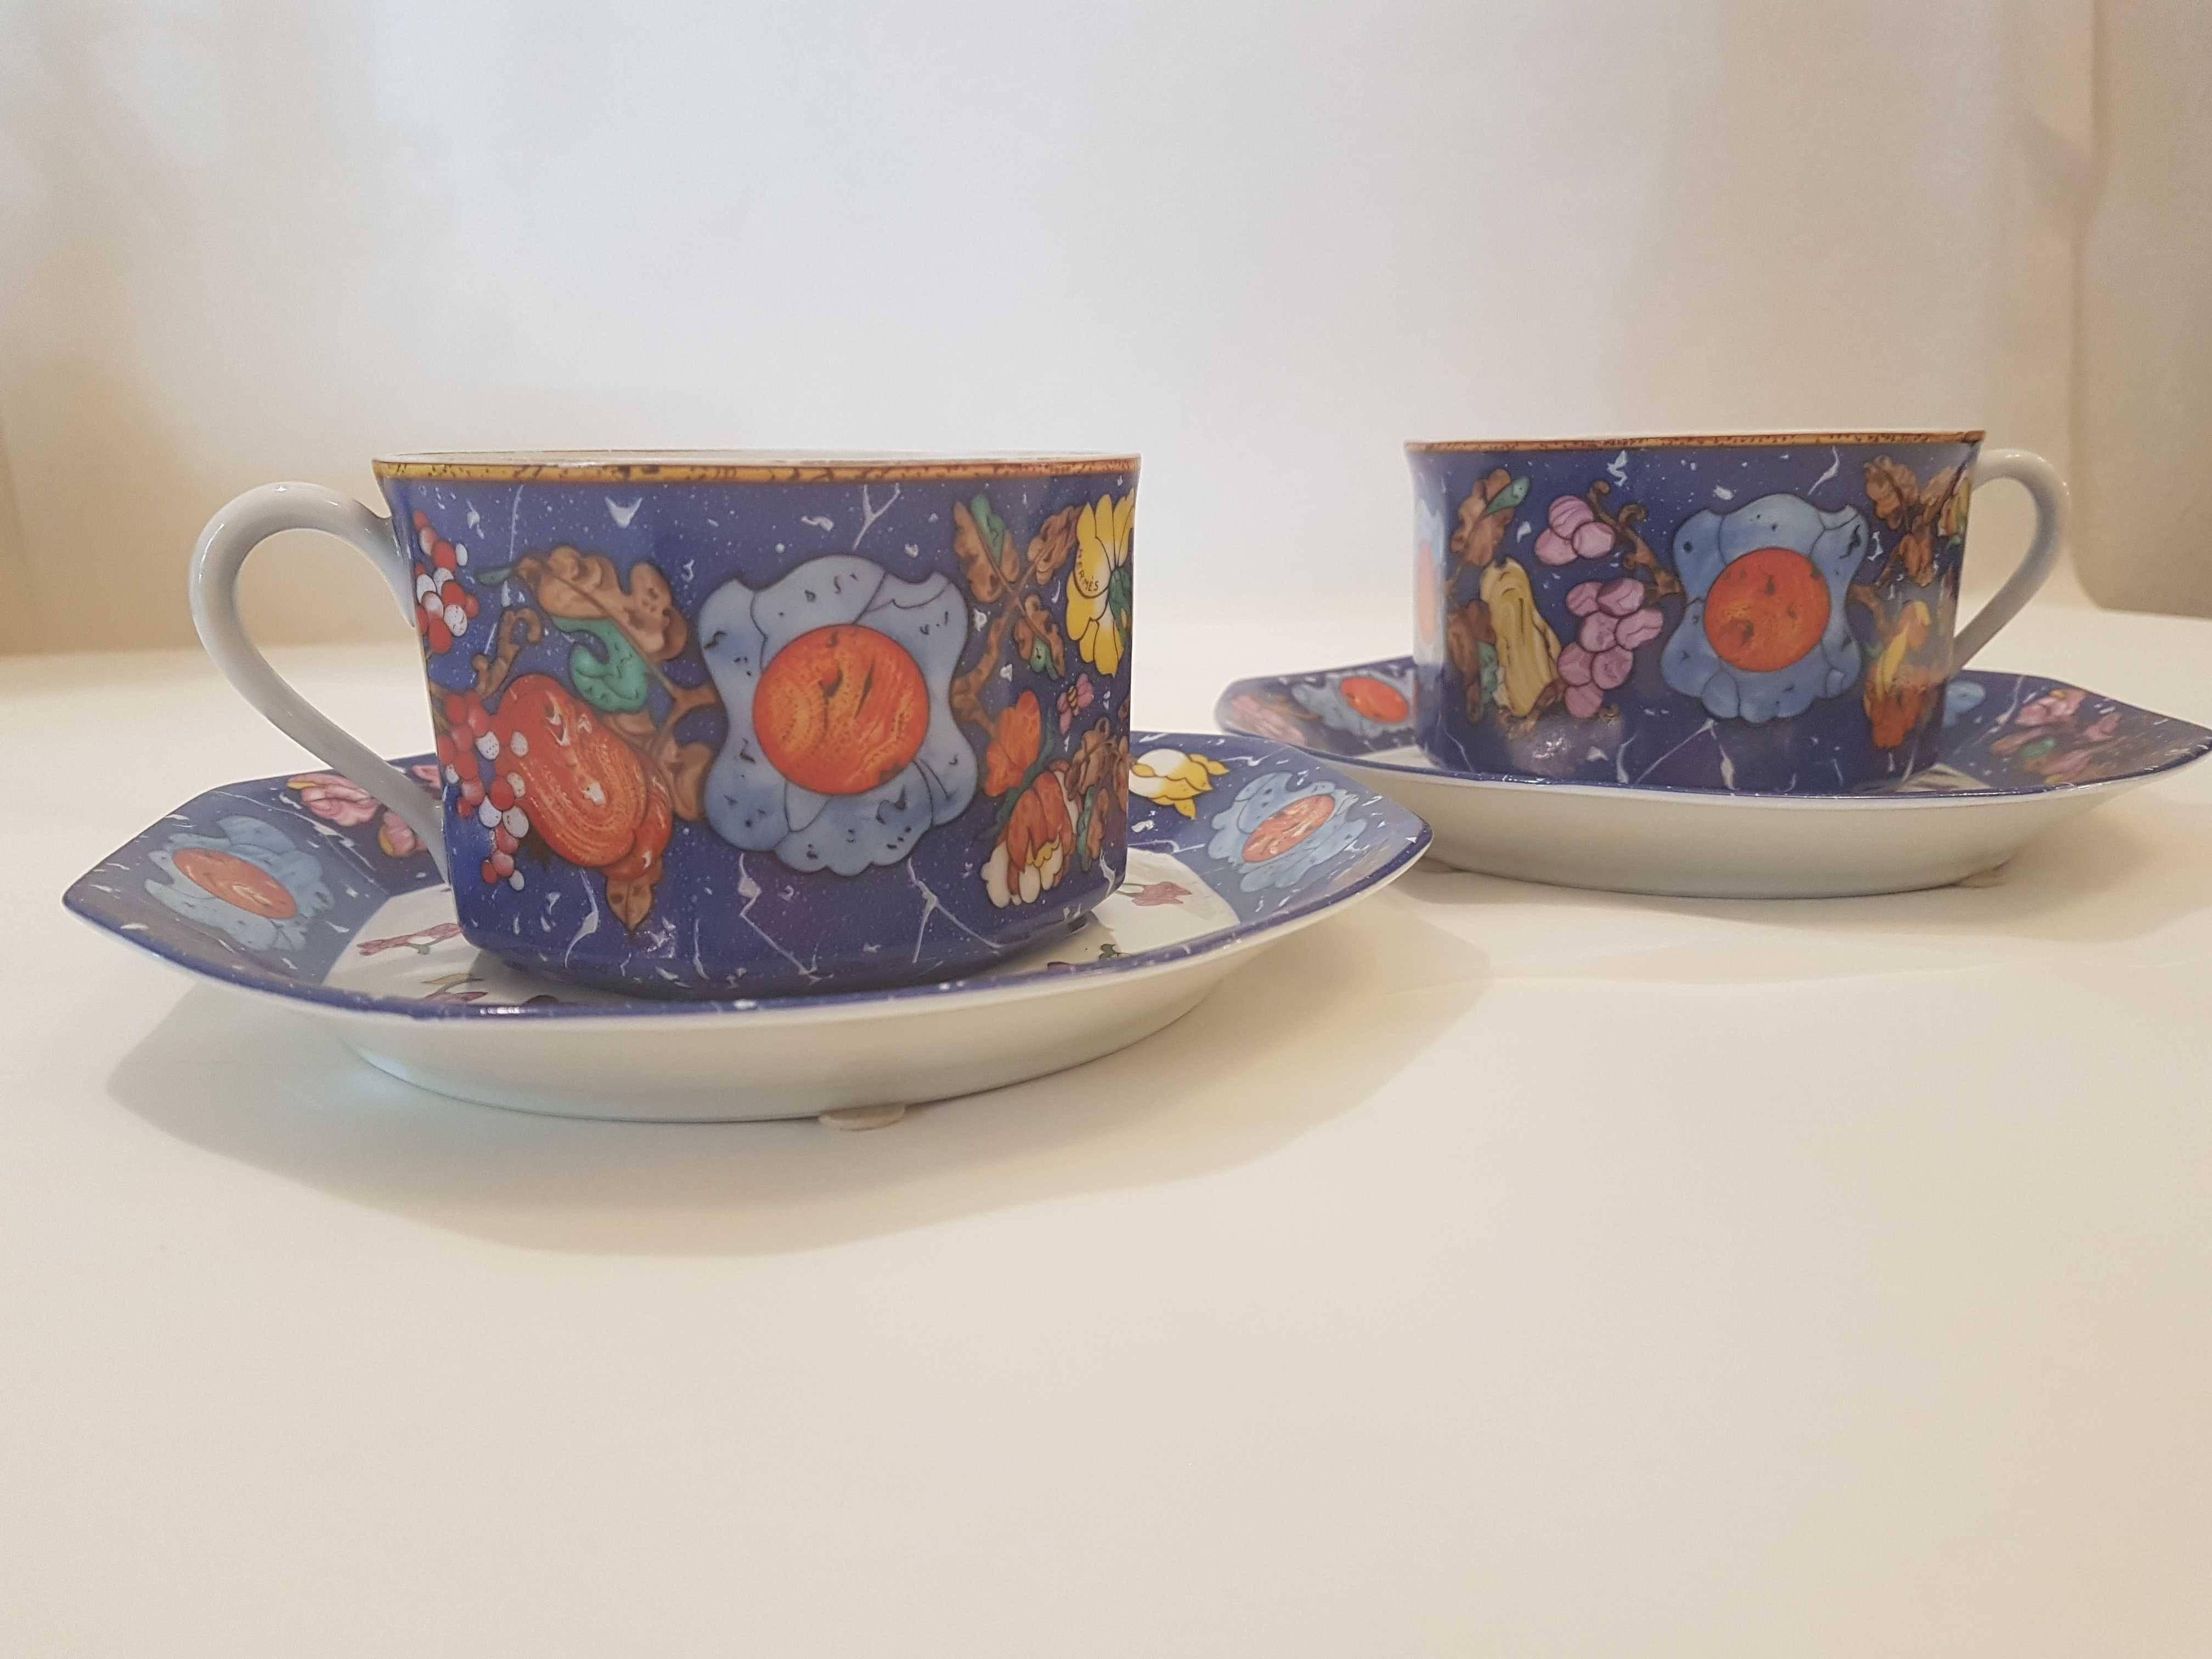 An Hermès polycrome porcelain breakfast set comprising two cups and two saucers.
Marqueterie de Pierre d'Orient et d'Occident pattern :this collection of porcelain was inspired by the art of marquetry as it was practiced with inlaid marble in 16th